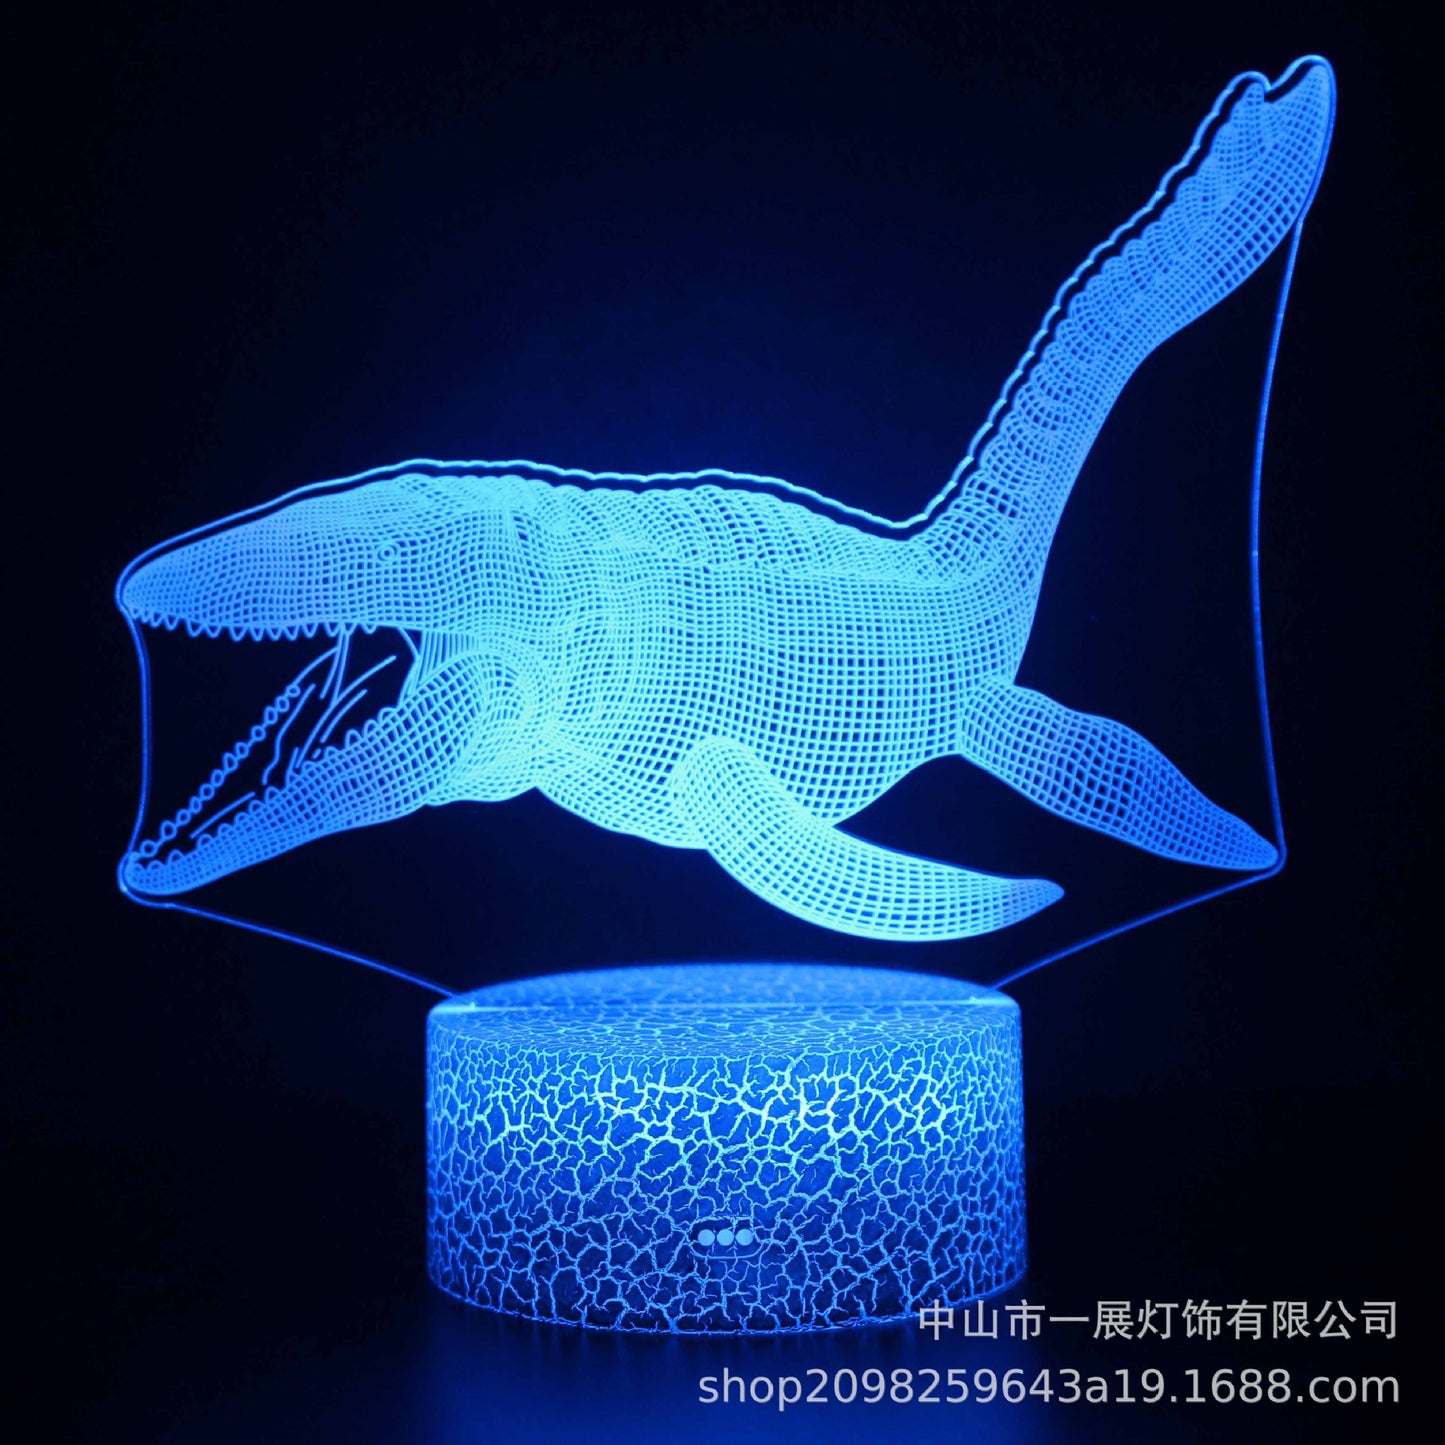 special for shark jellyfish series colorful creative 3DLED night light gift table lamp visual light